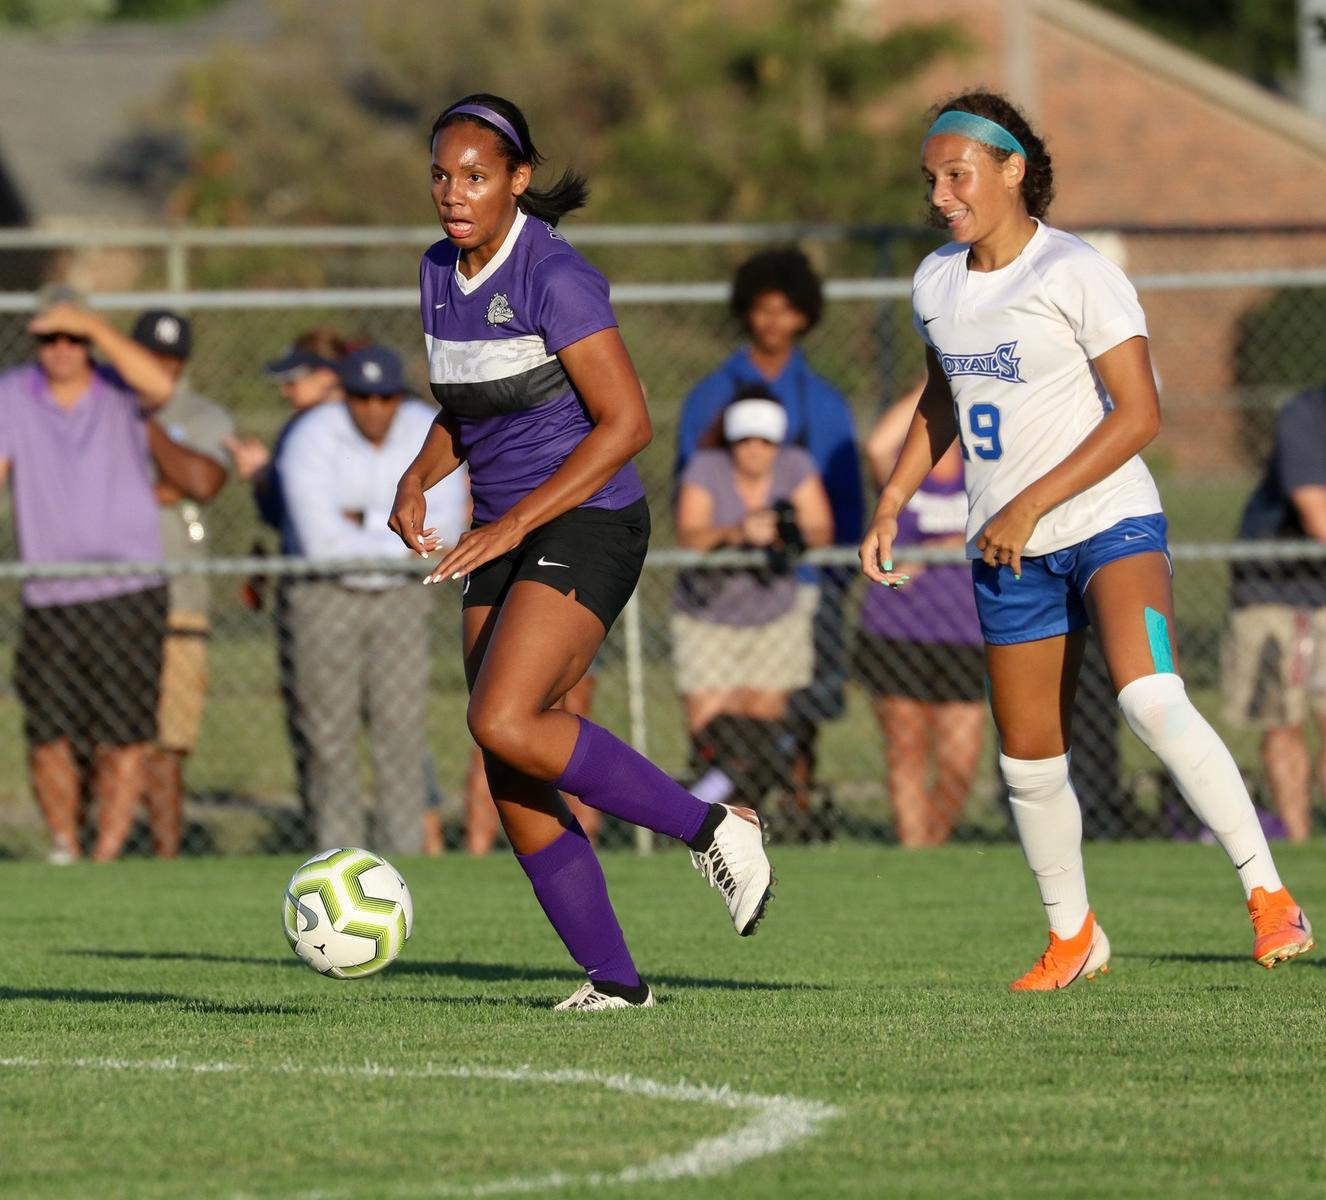 @bhsdogs_gsoccer heads to highly-touted Zionsville Invite